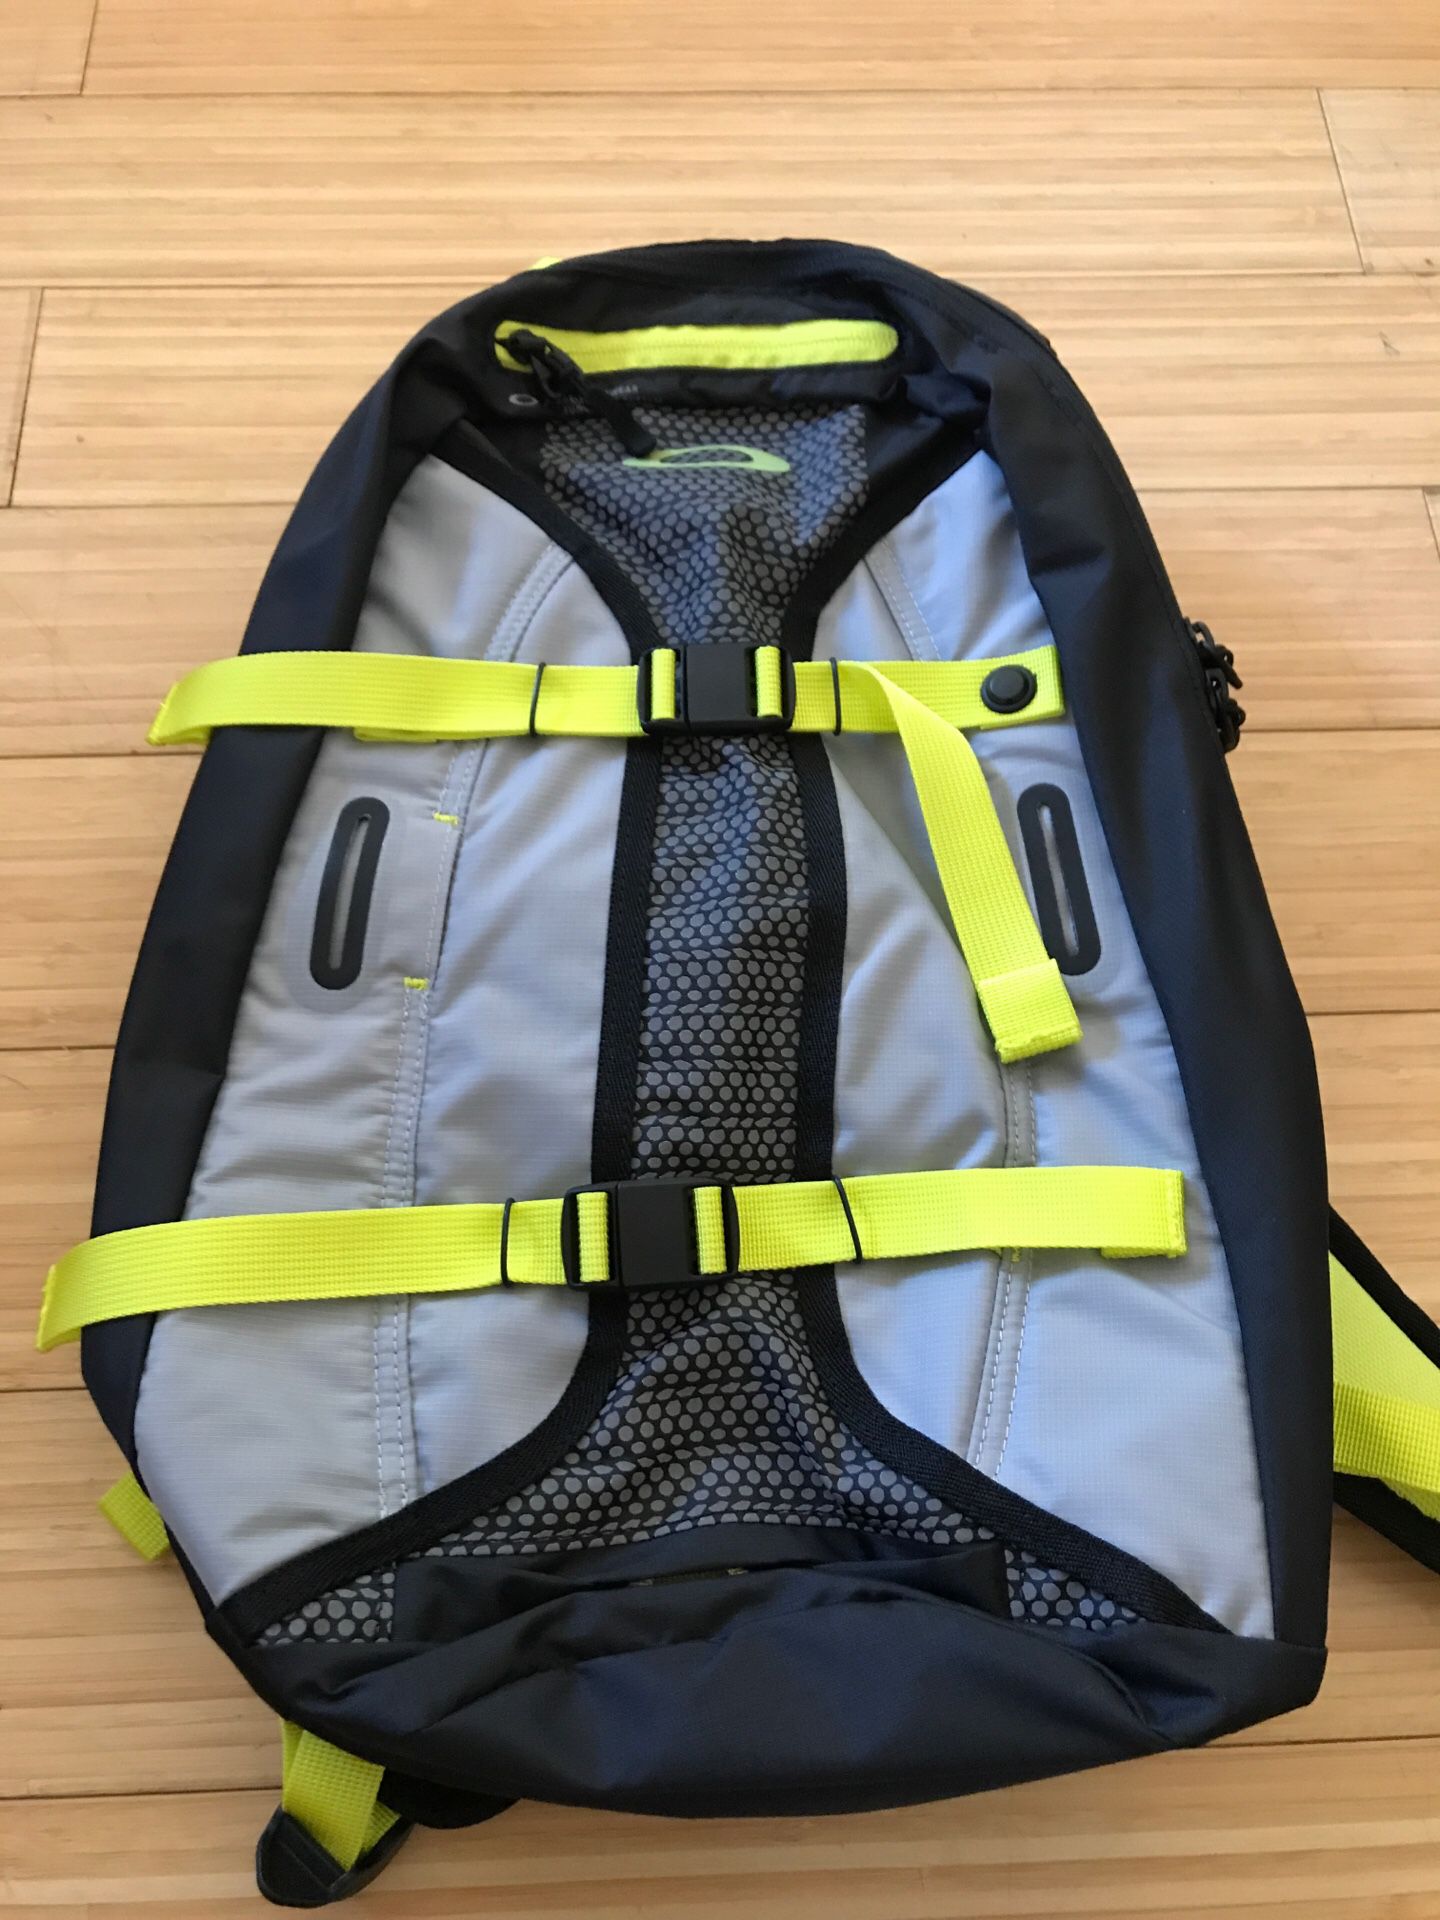 Oakley Aero pack light backpack new with tags